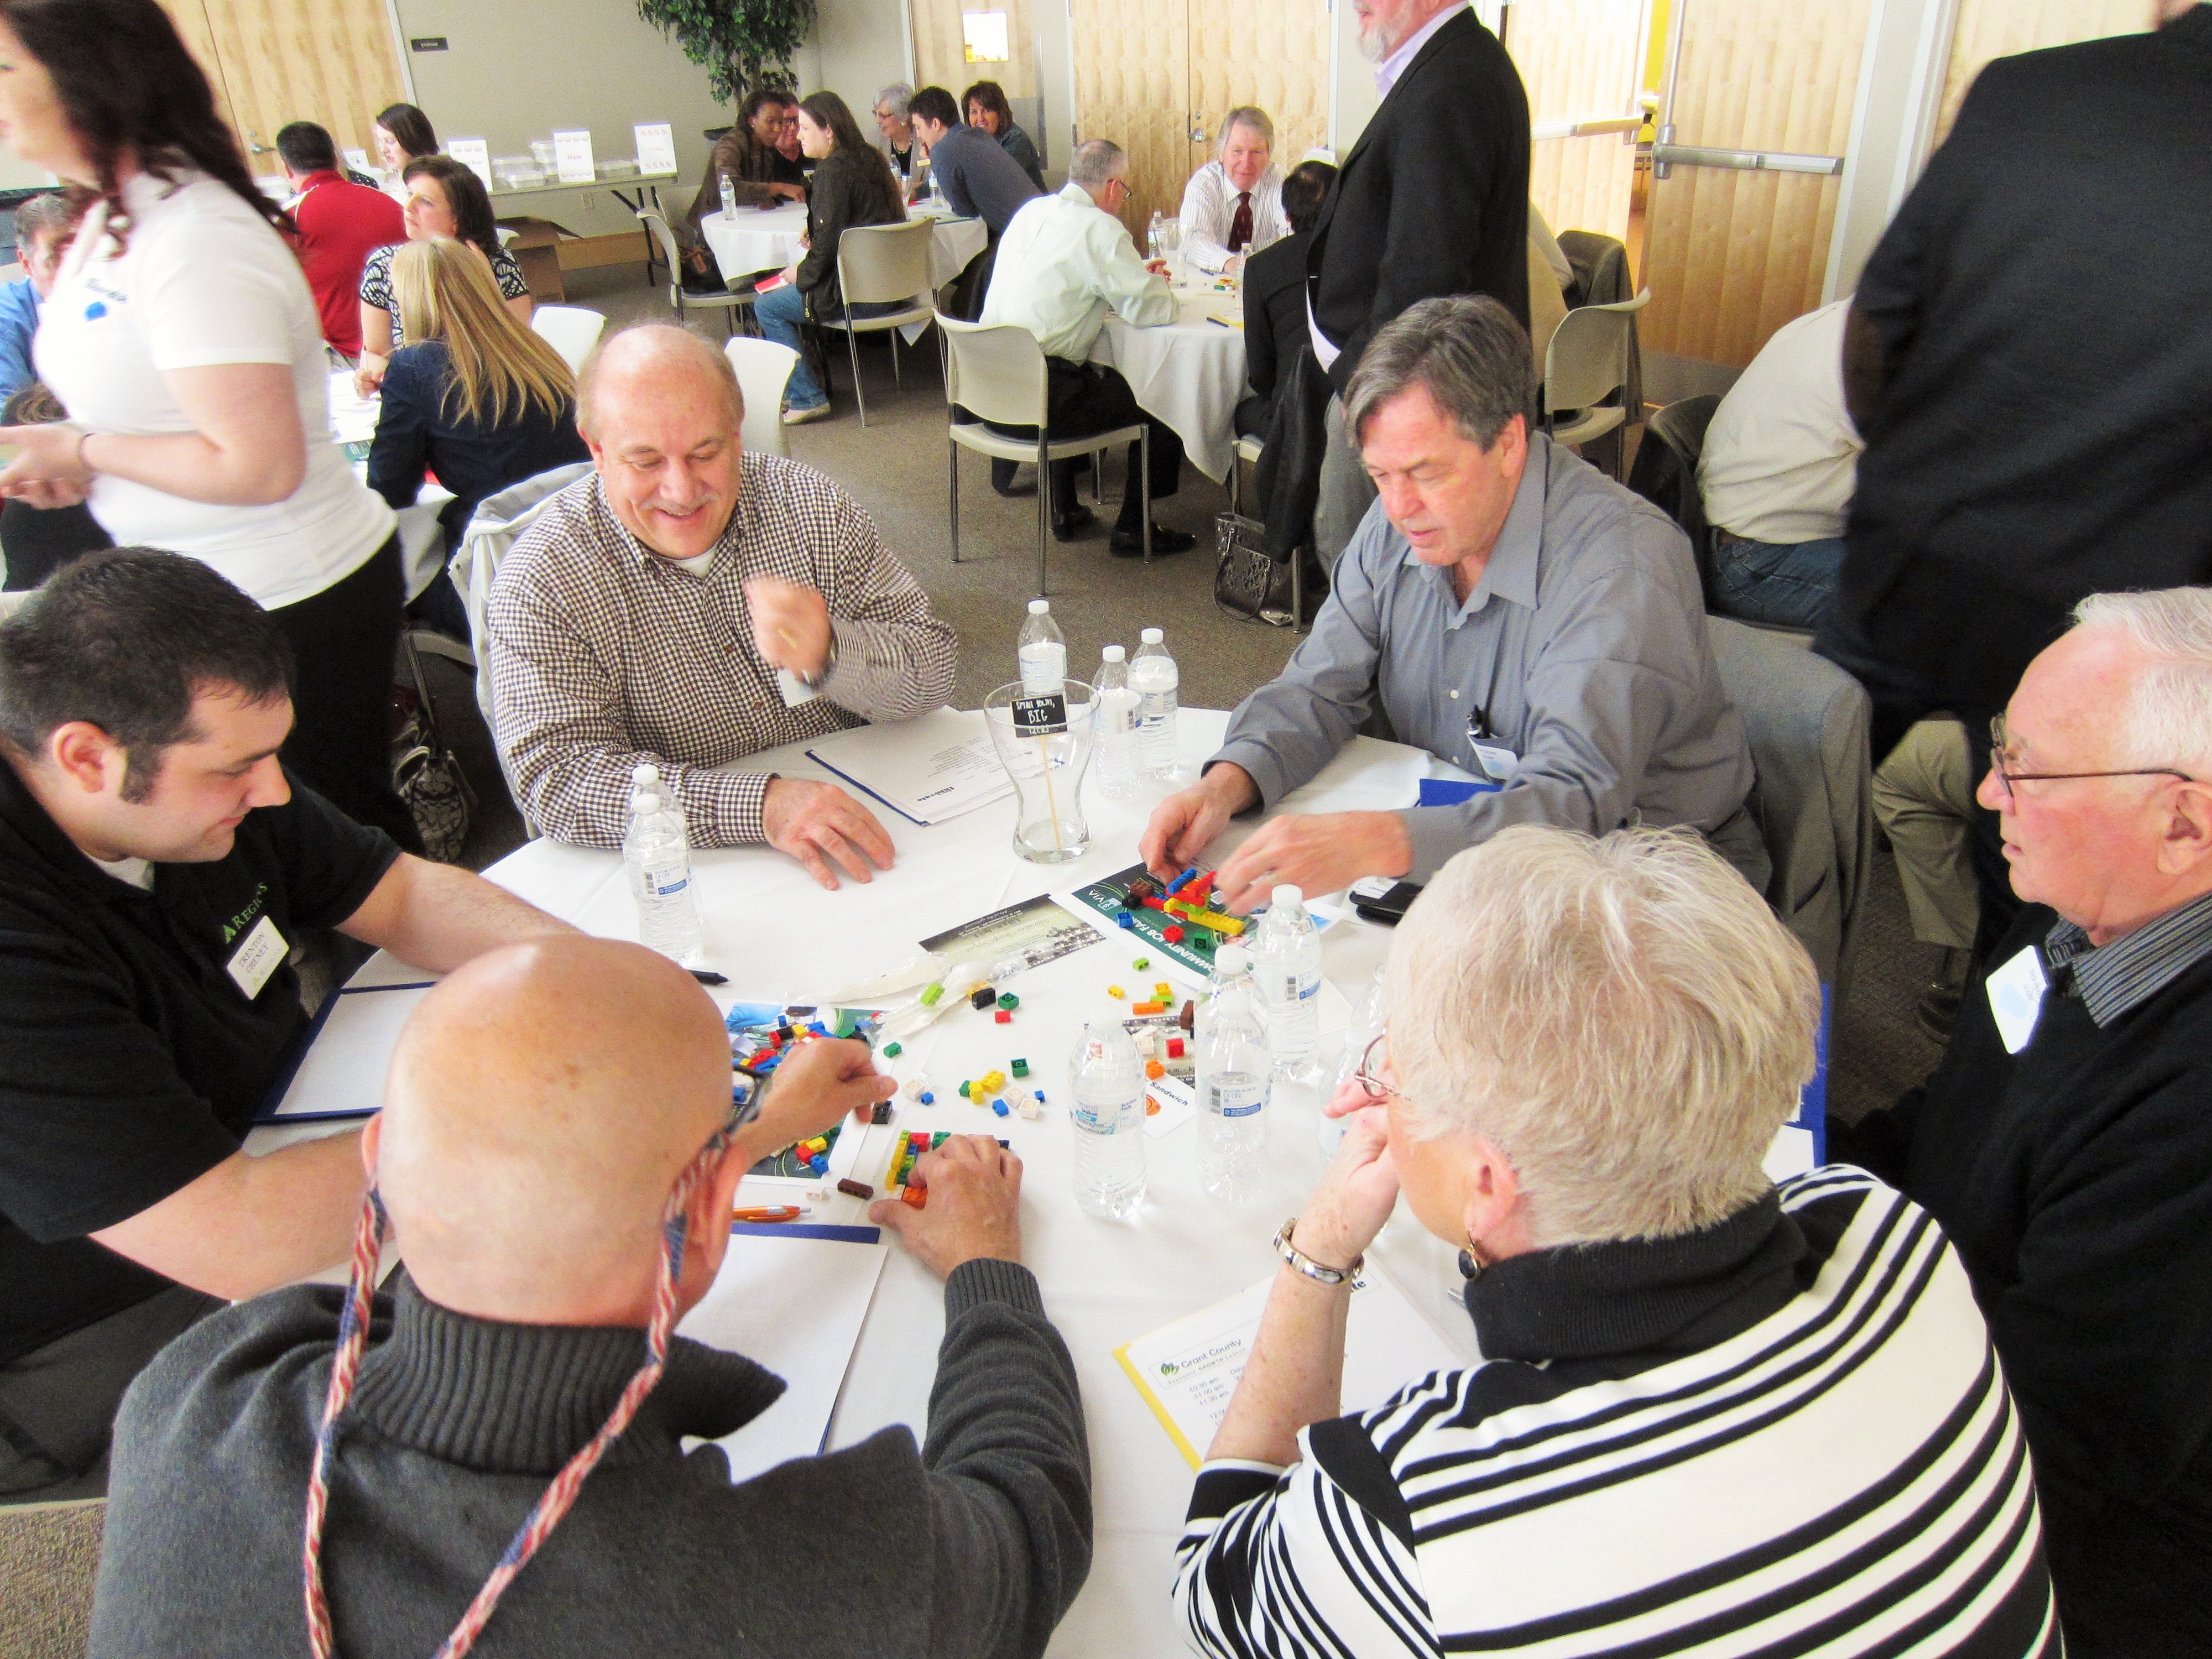 “Date to Innovate” luncheon entailed several engaging activities, even a LEGO-building challenge to foster collaboration and innovation